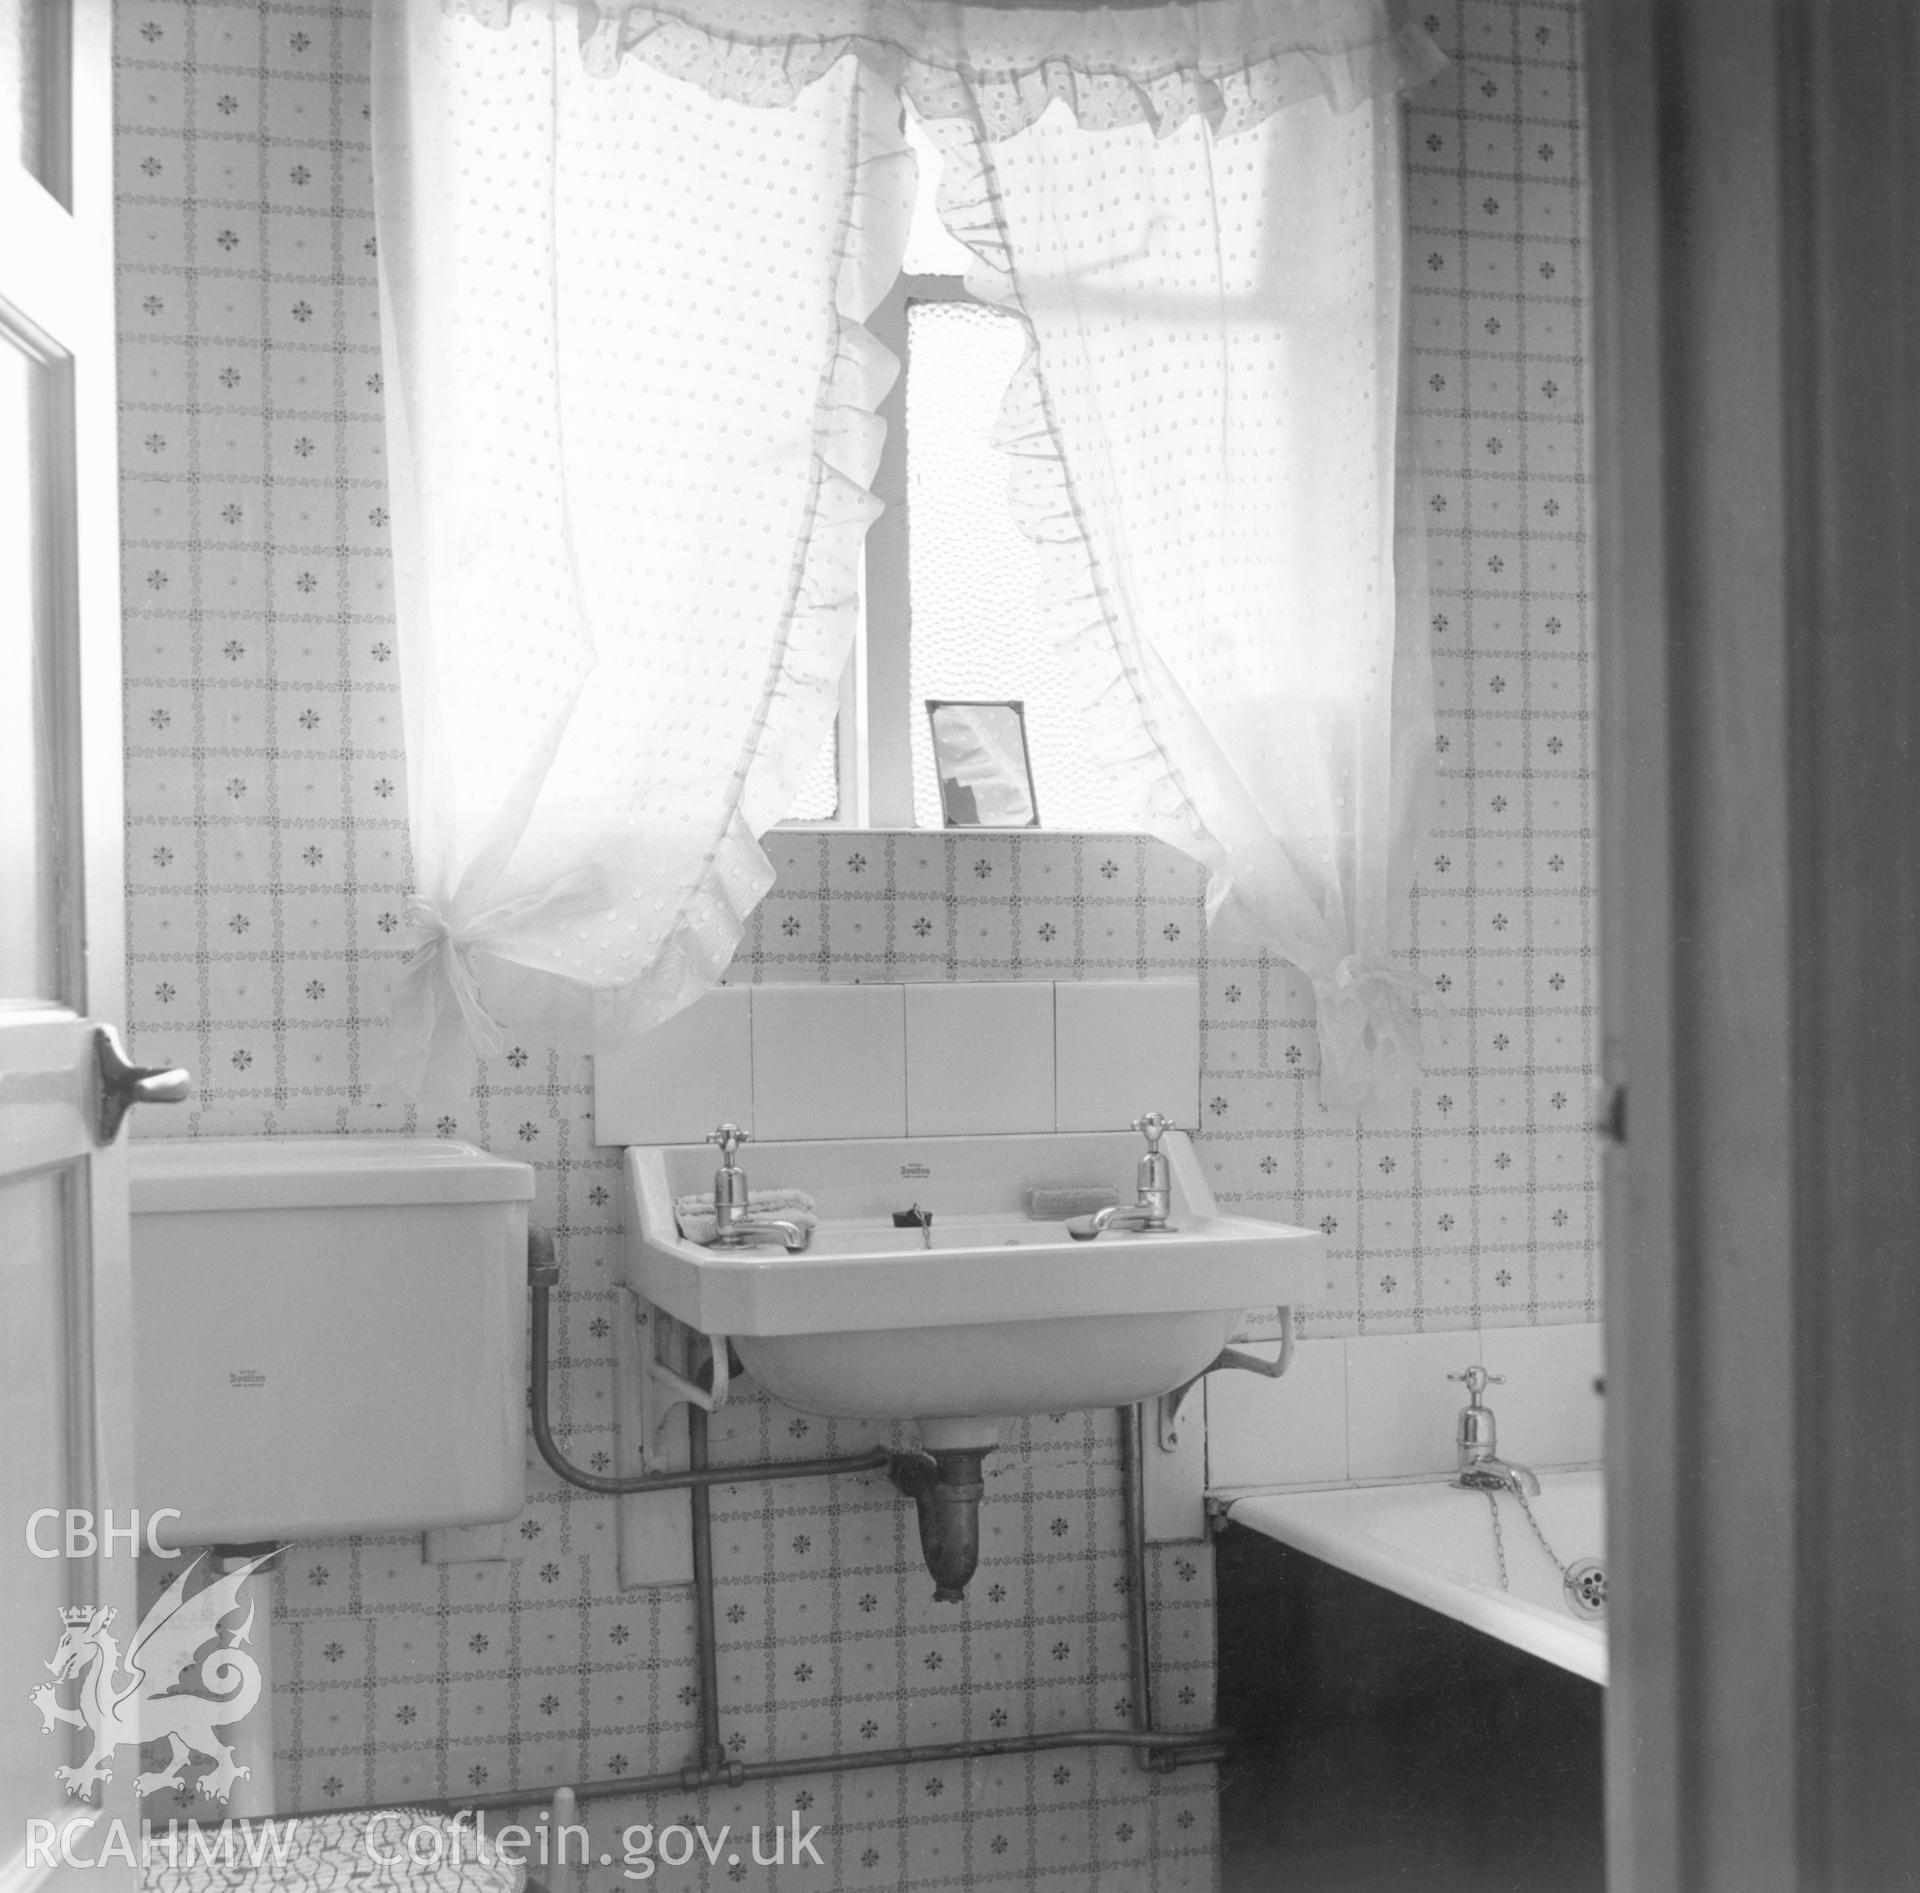 1 b/w print showing interior of a house on Council Street, Ebbw Vale (showing bathroom), used as an illustration of the Housing Improvement Grant scheme for exhibitions held at Ministry of Housing stands at agricultural shows (1960); collated by the former Central Office of Information.